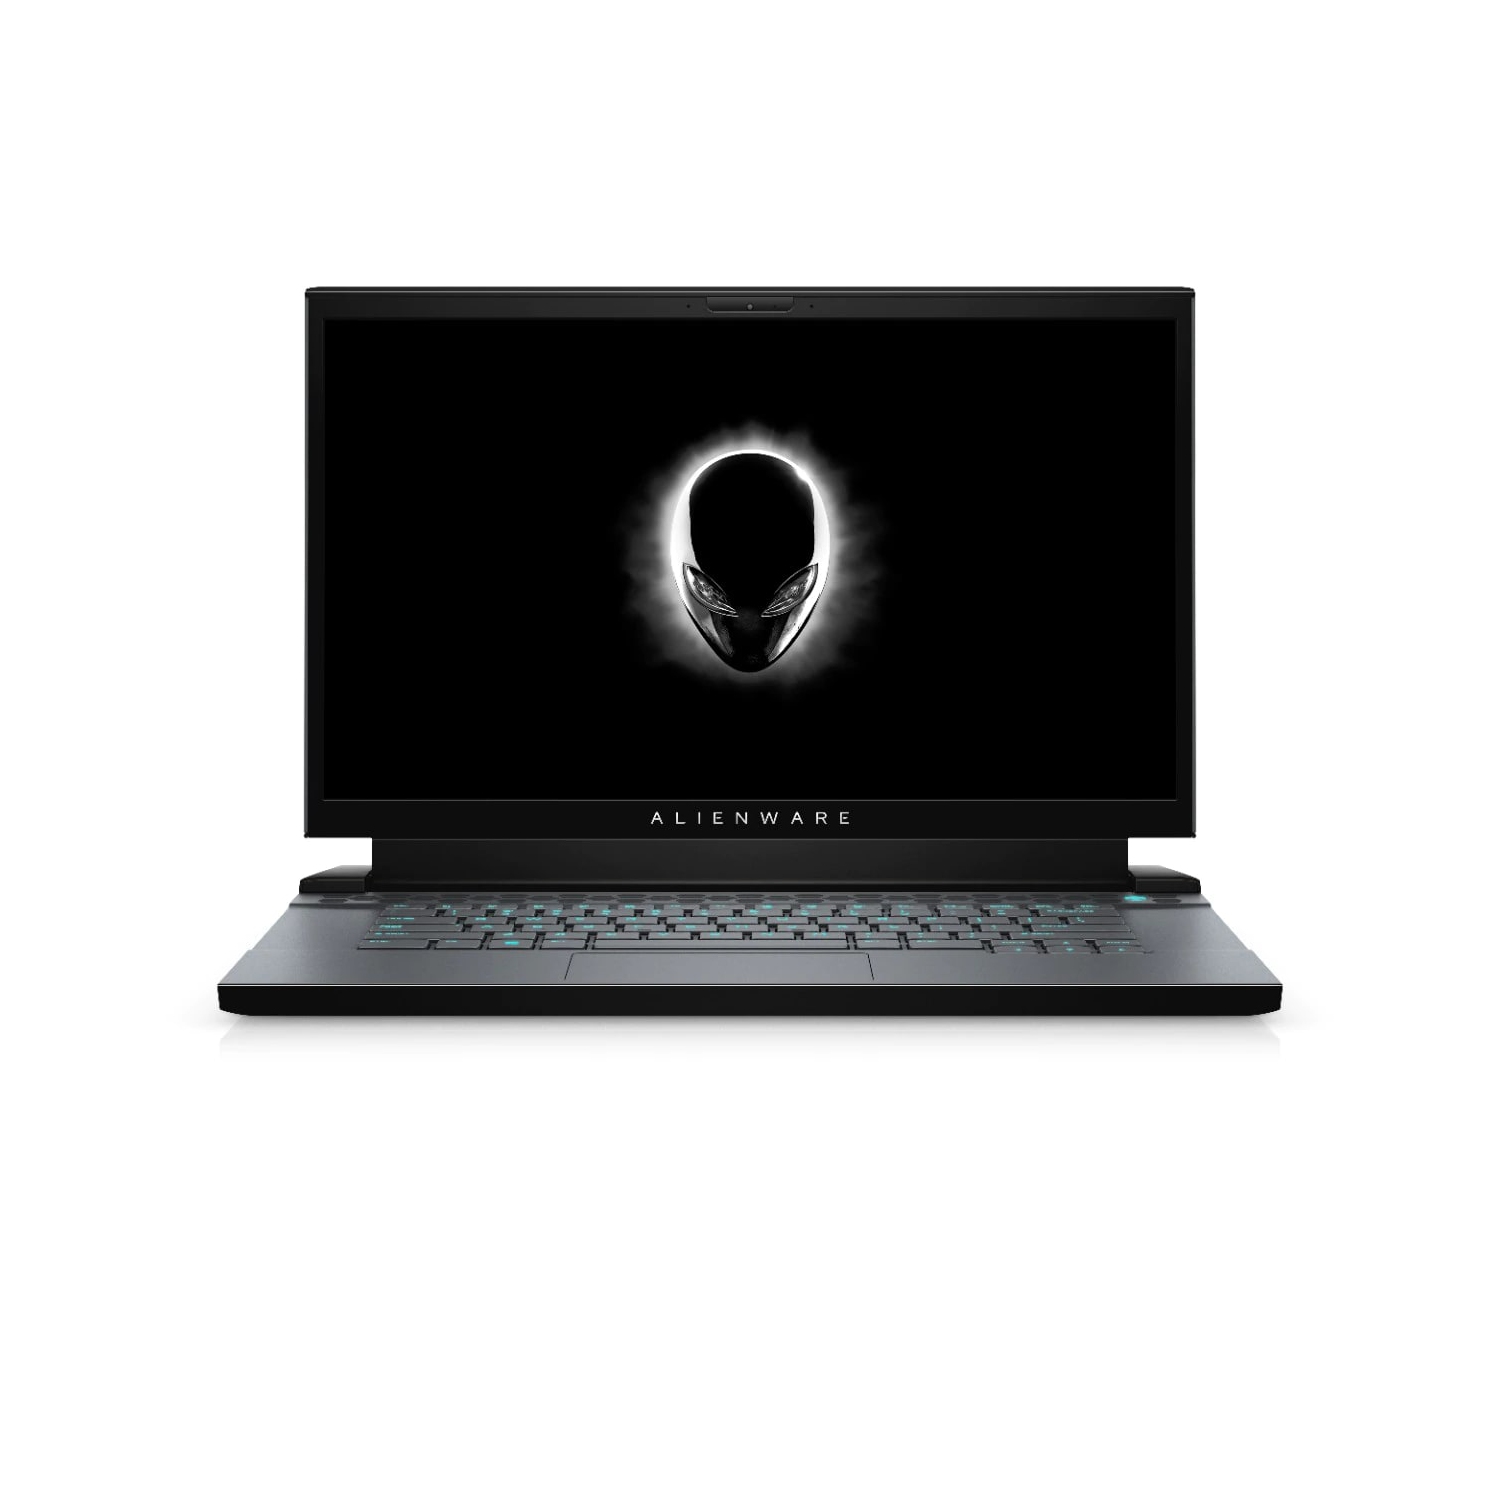 Refurbished (Excellent) - Dell Alienware m15 R2 Gaming Laptop (2019), 15.6" FHD, Core i7, 512GB SSD + 512GB SSD, 16GB RAM, RTX 2070, 6 Cores @ 4.5 GHz Certified